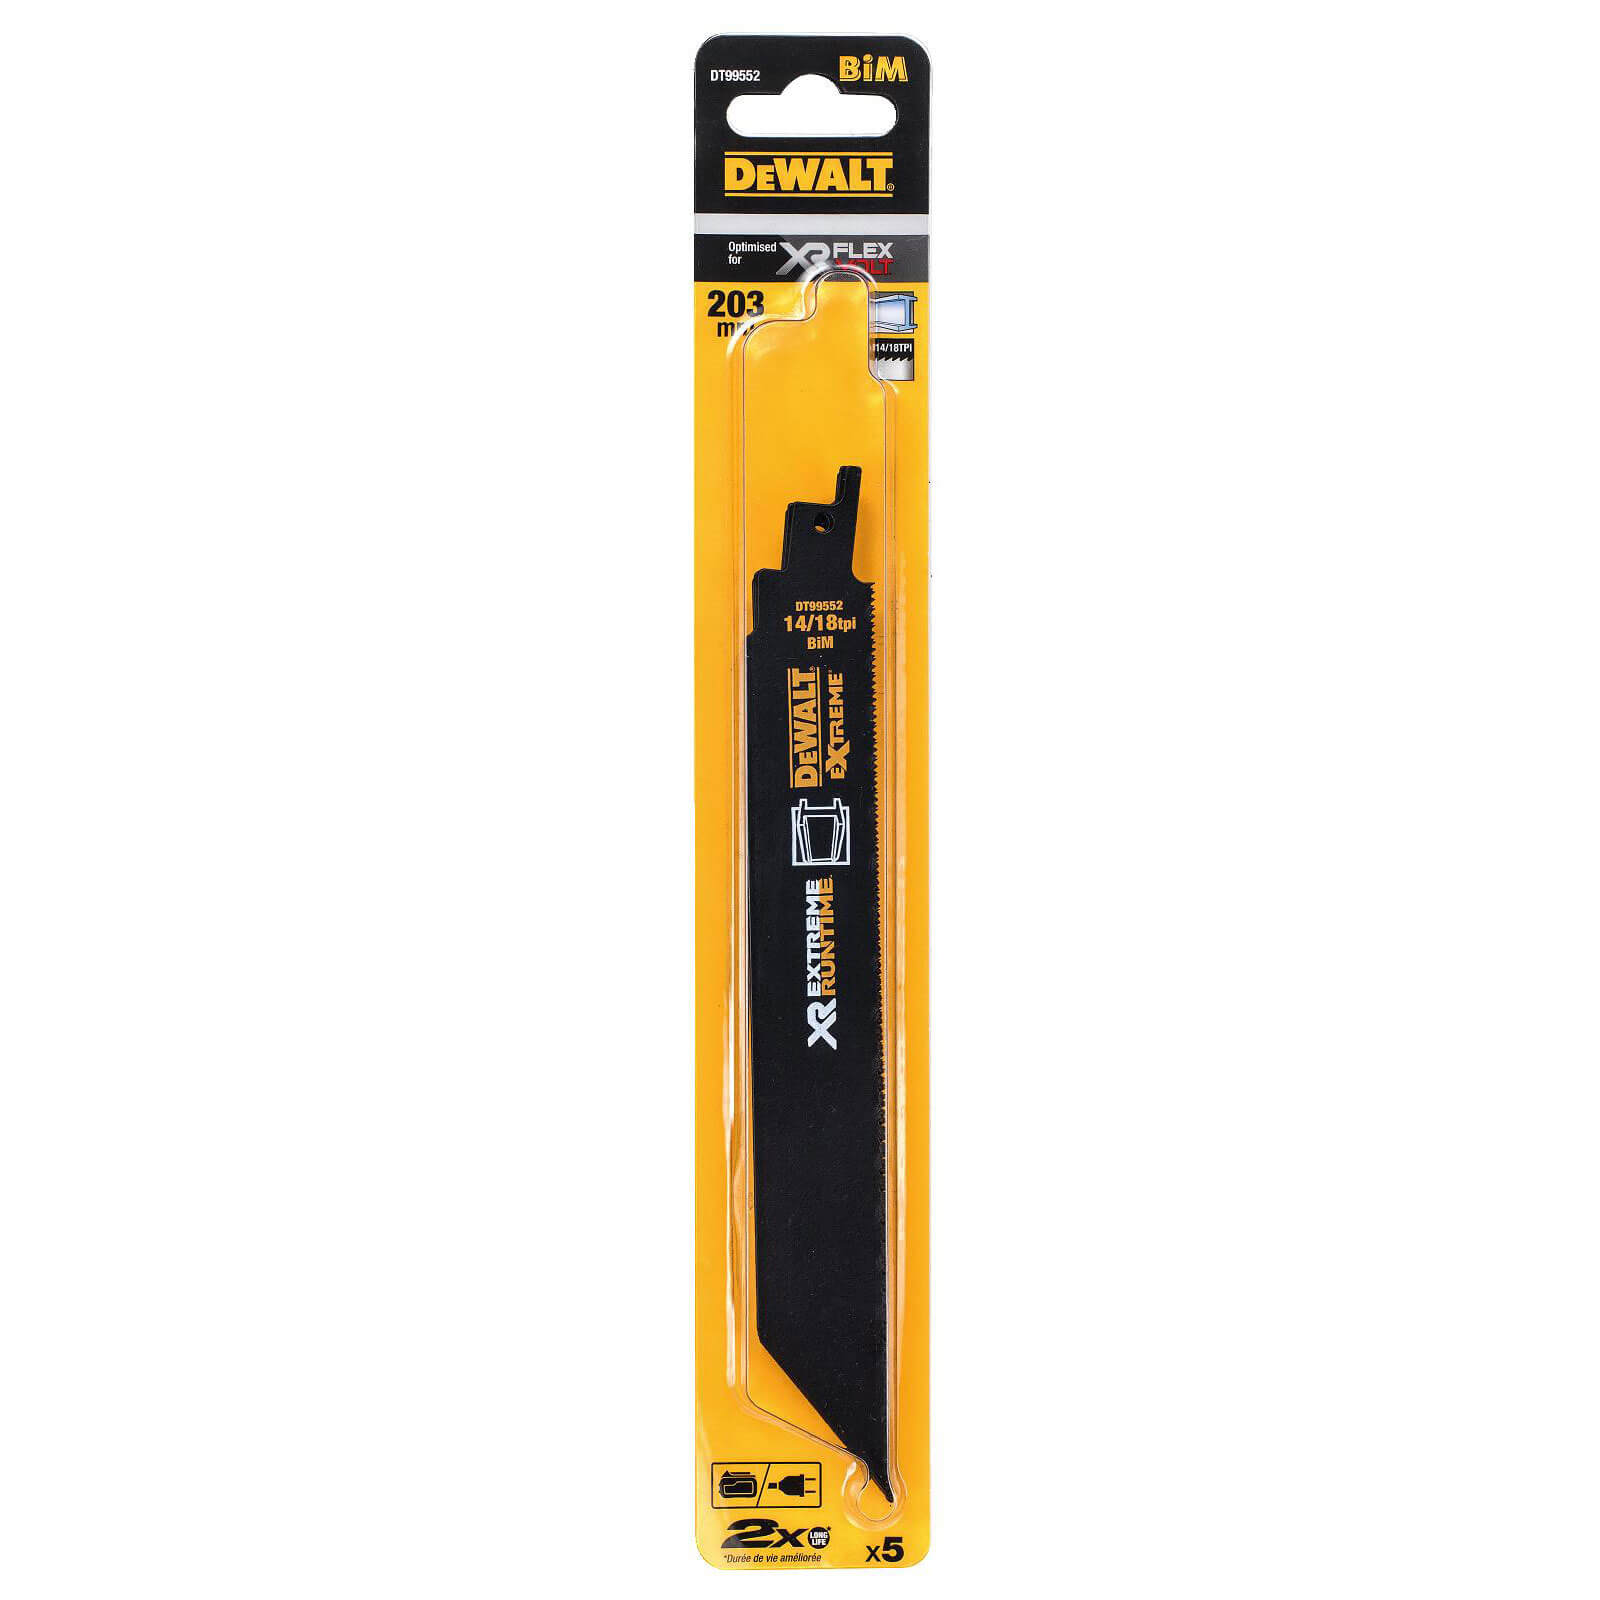 Image of DeWalt Extreme Runtime Metal Cutting Reciprocating Sabre Saw Blades 200mm Pack of 5